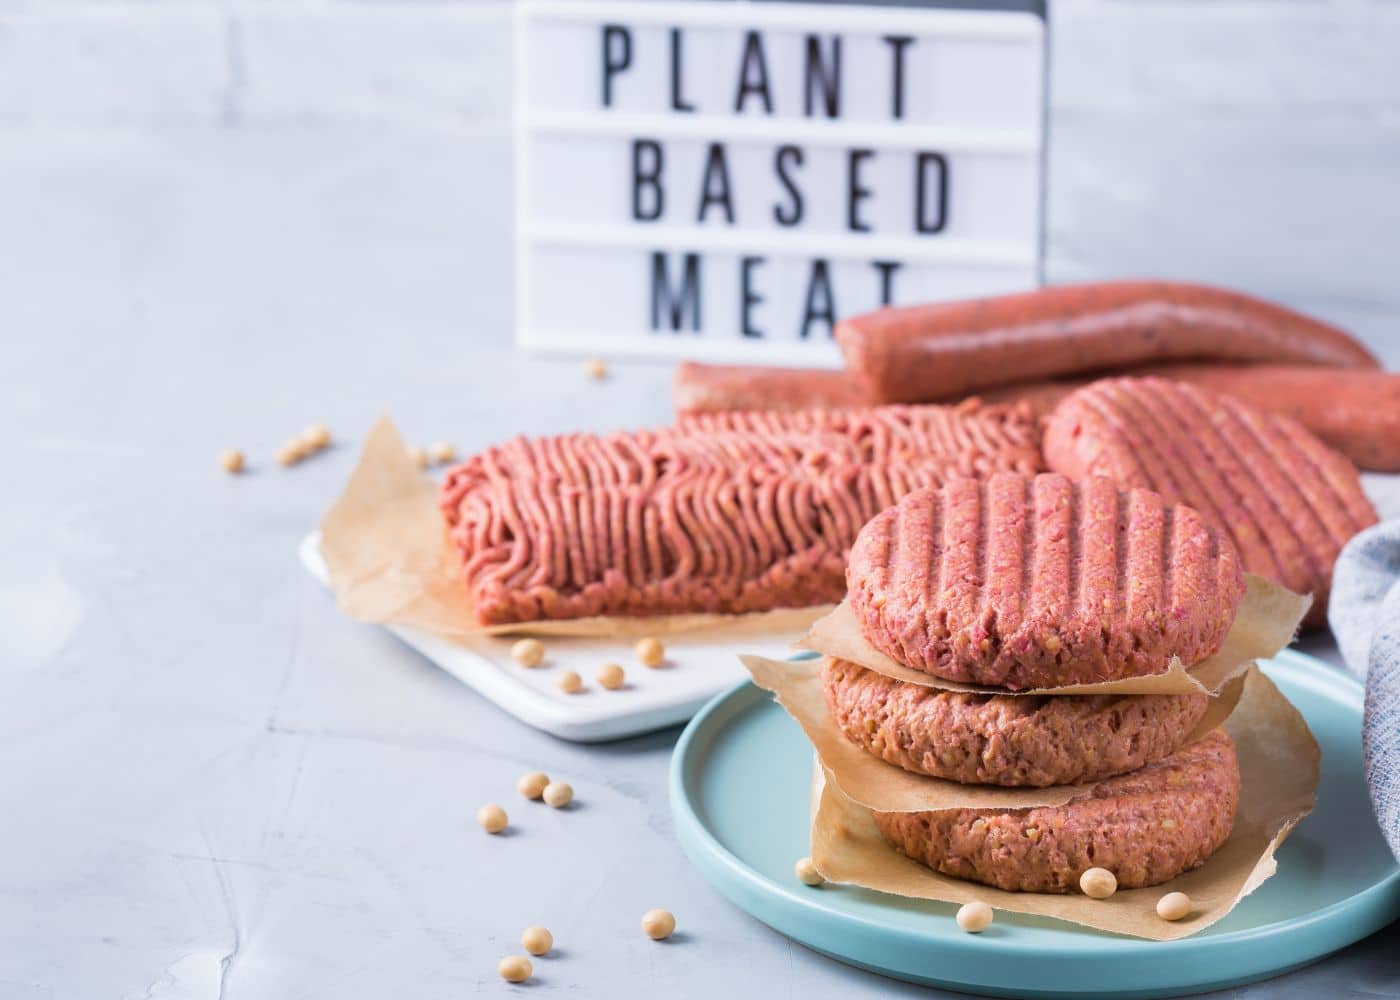 https://www.cleaneatingkitchen.com/wp-content/uploads/2019/11/plant-based-meat-selection.jpg